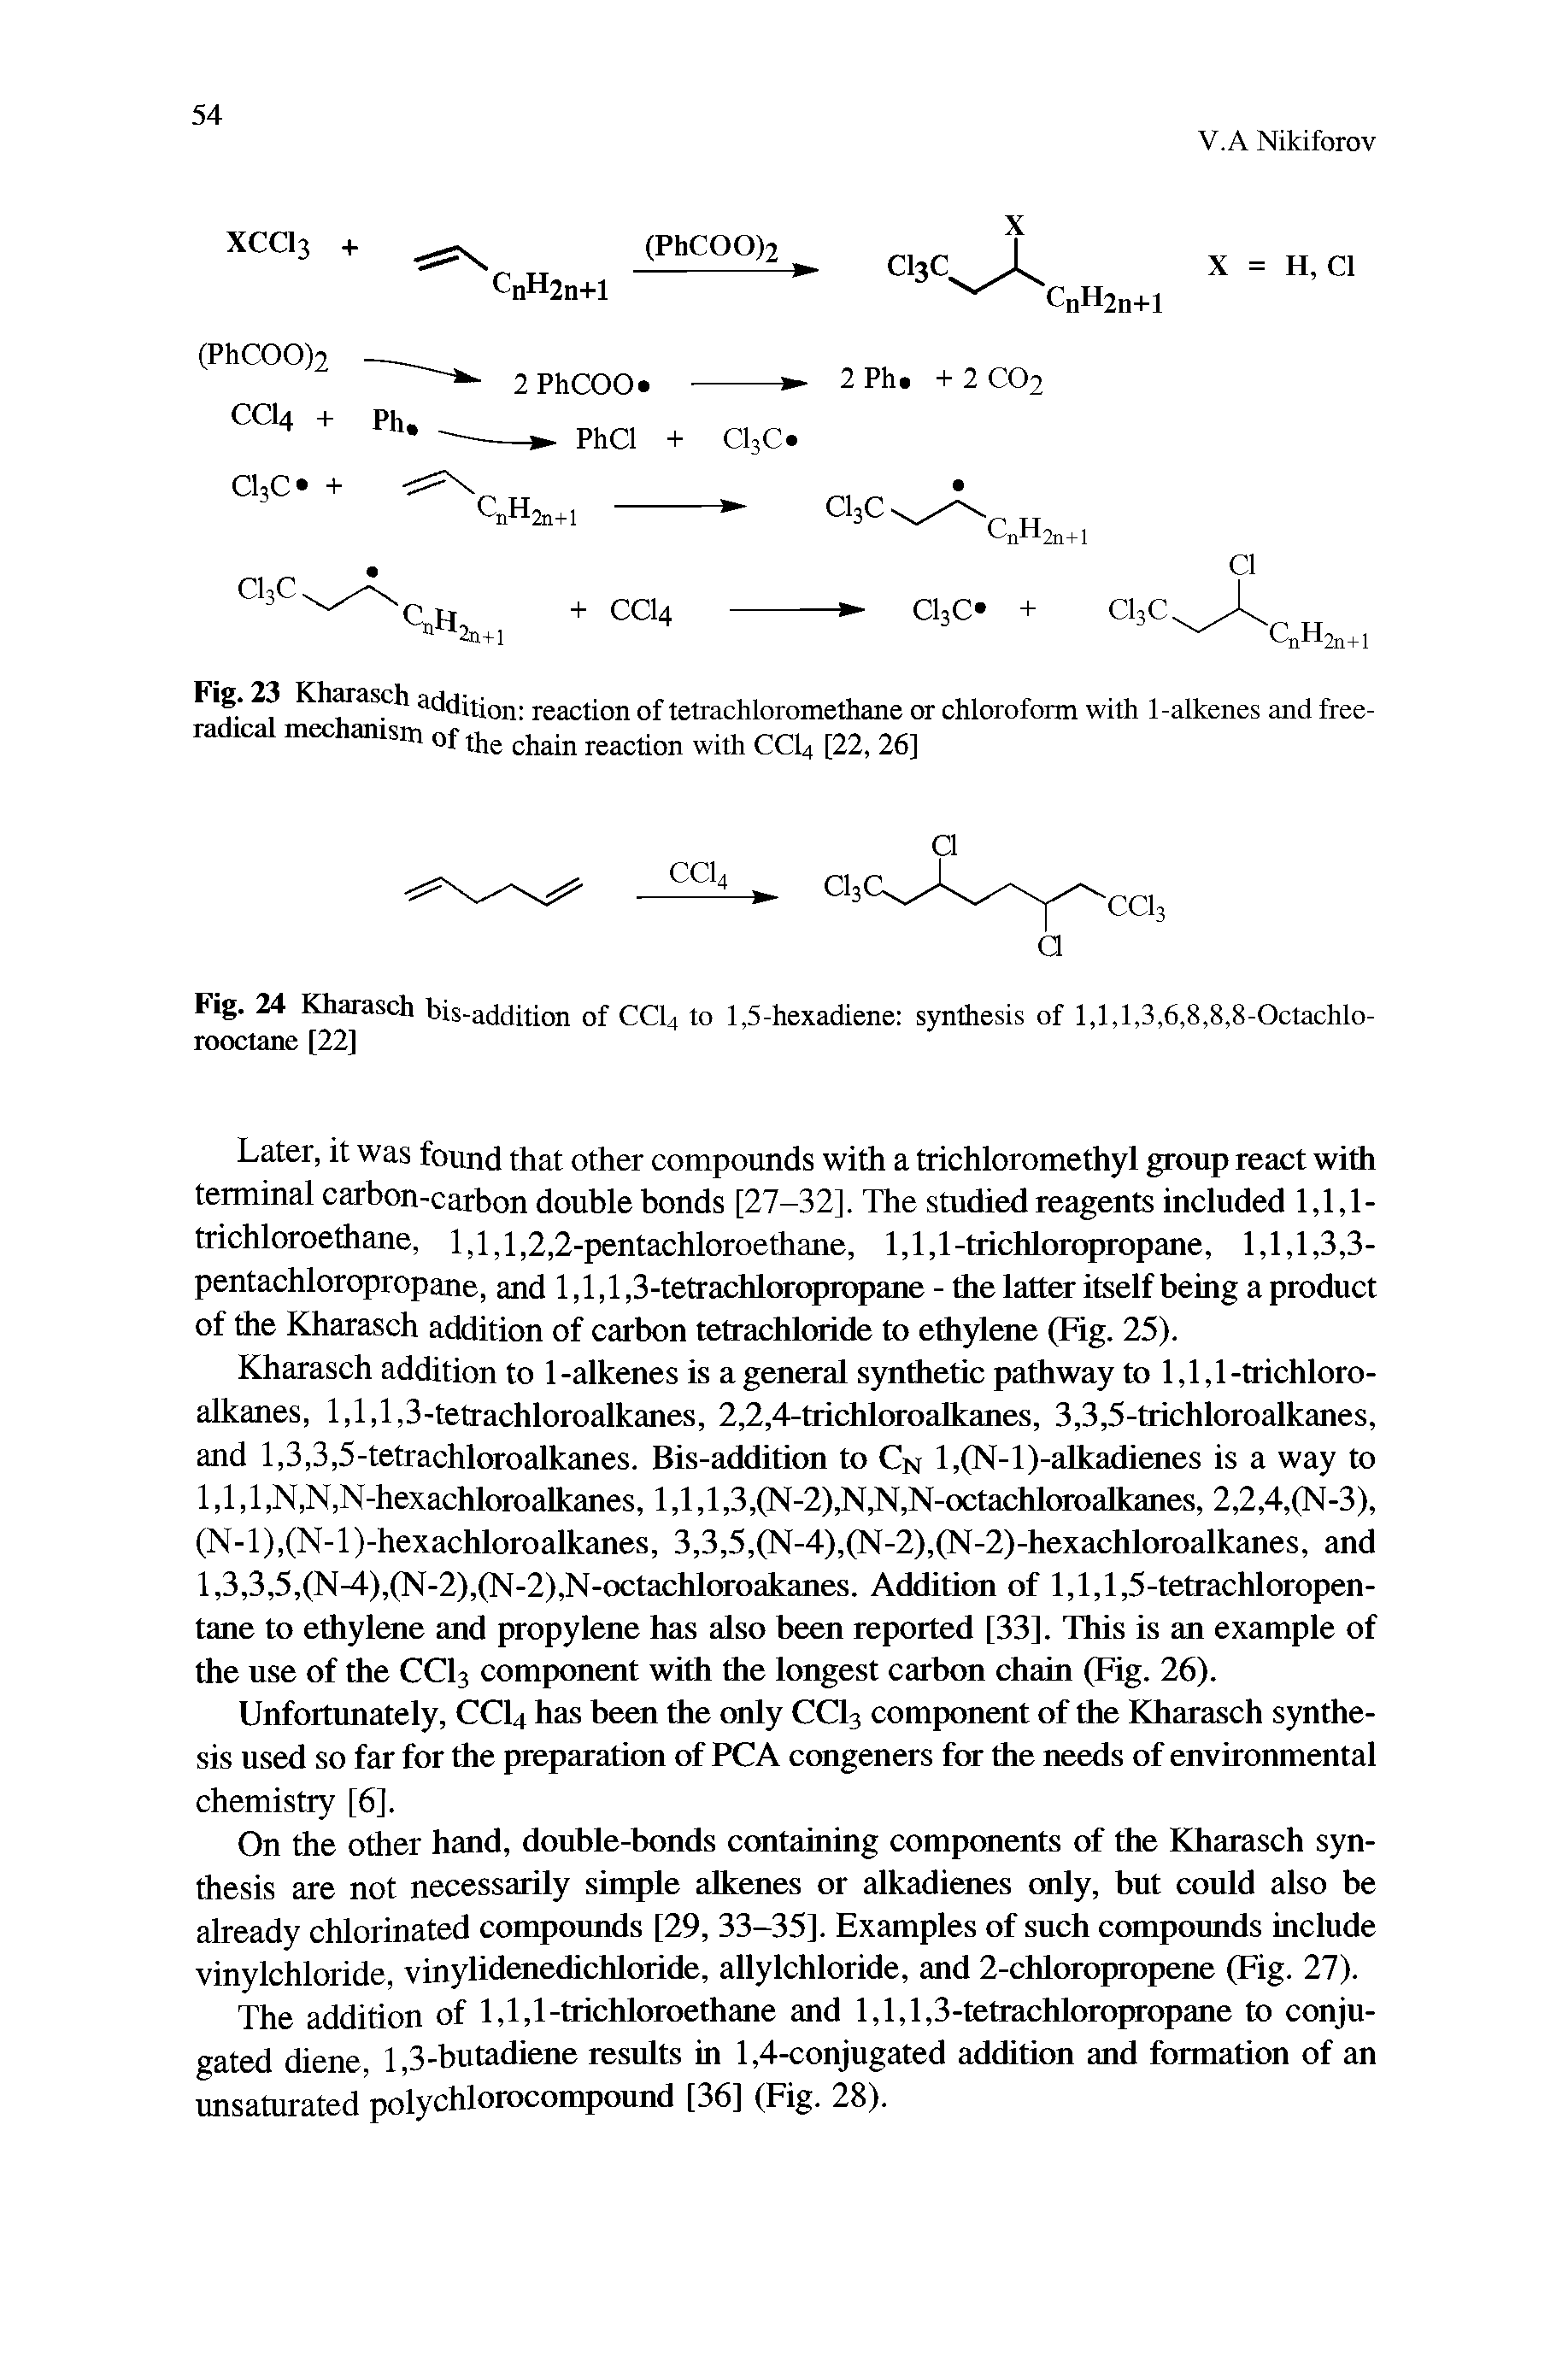 Fig. 23 Kh asch addition reaction of tetrachloromethane or chloroform with 1-alkenes and free-radical mechanism of the chain reaction with CCI4 [22, 26]...